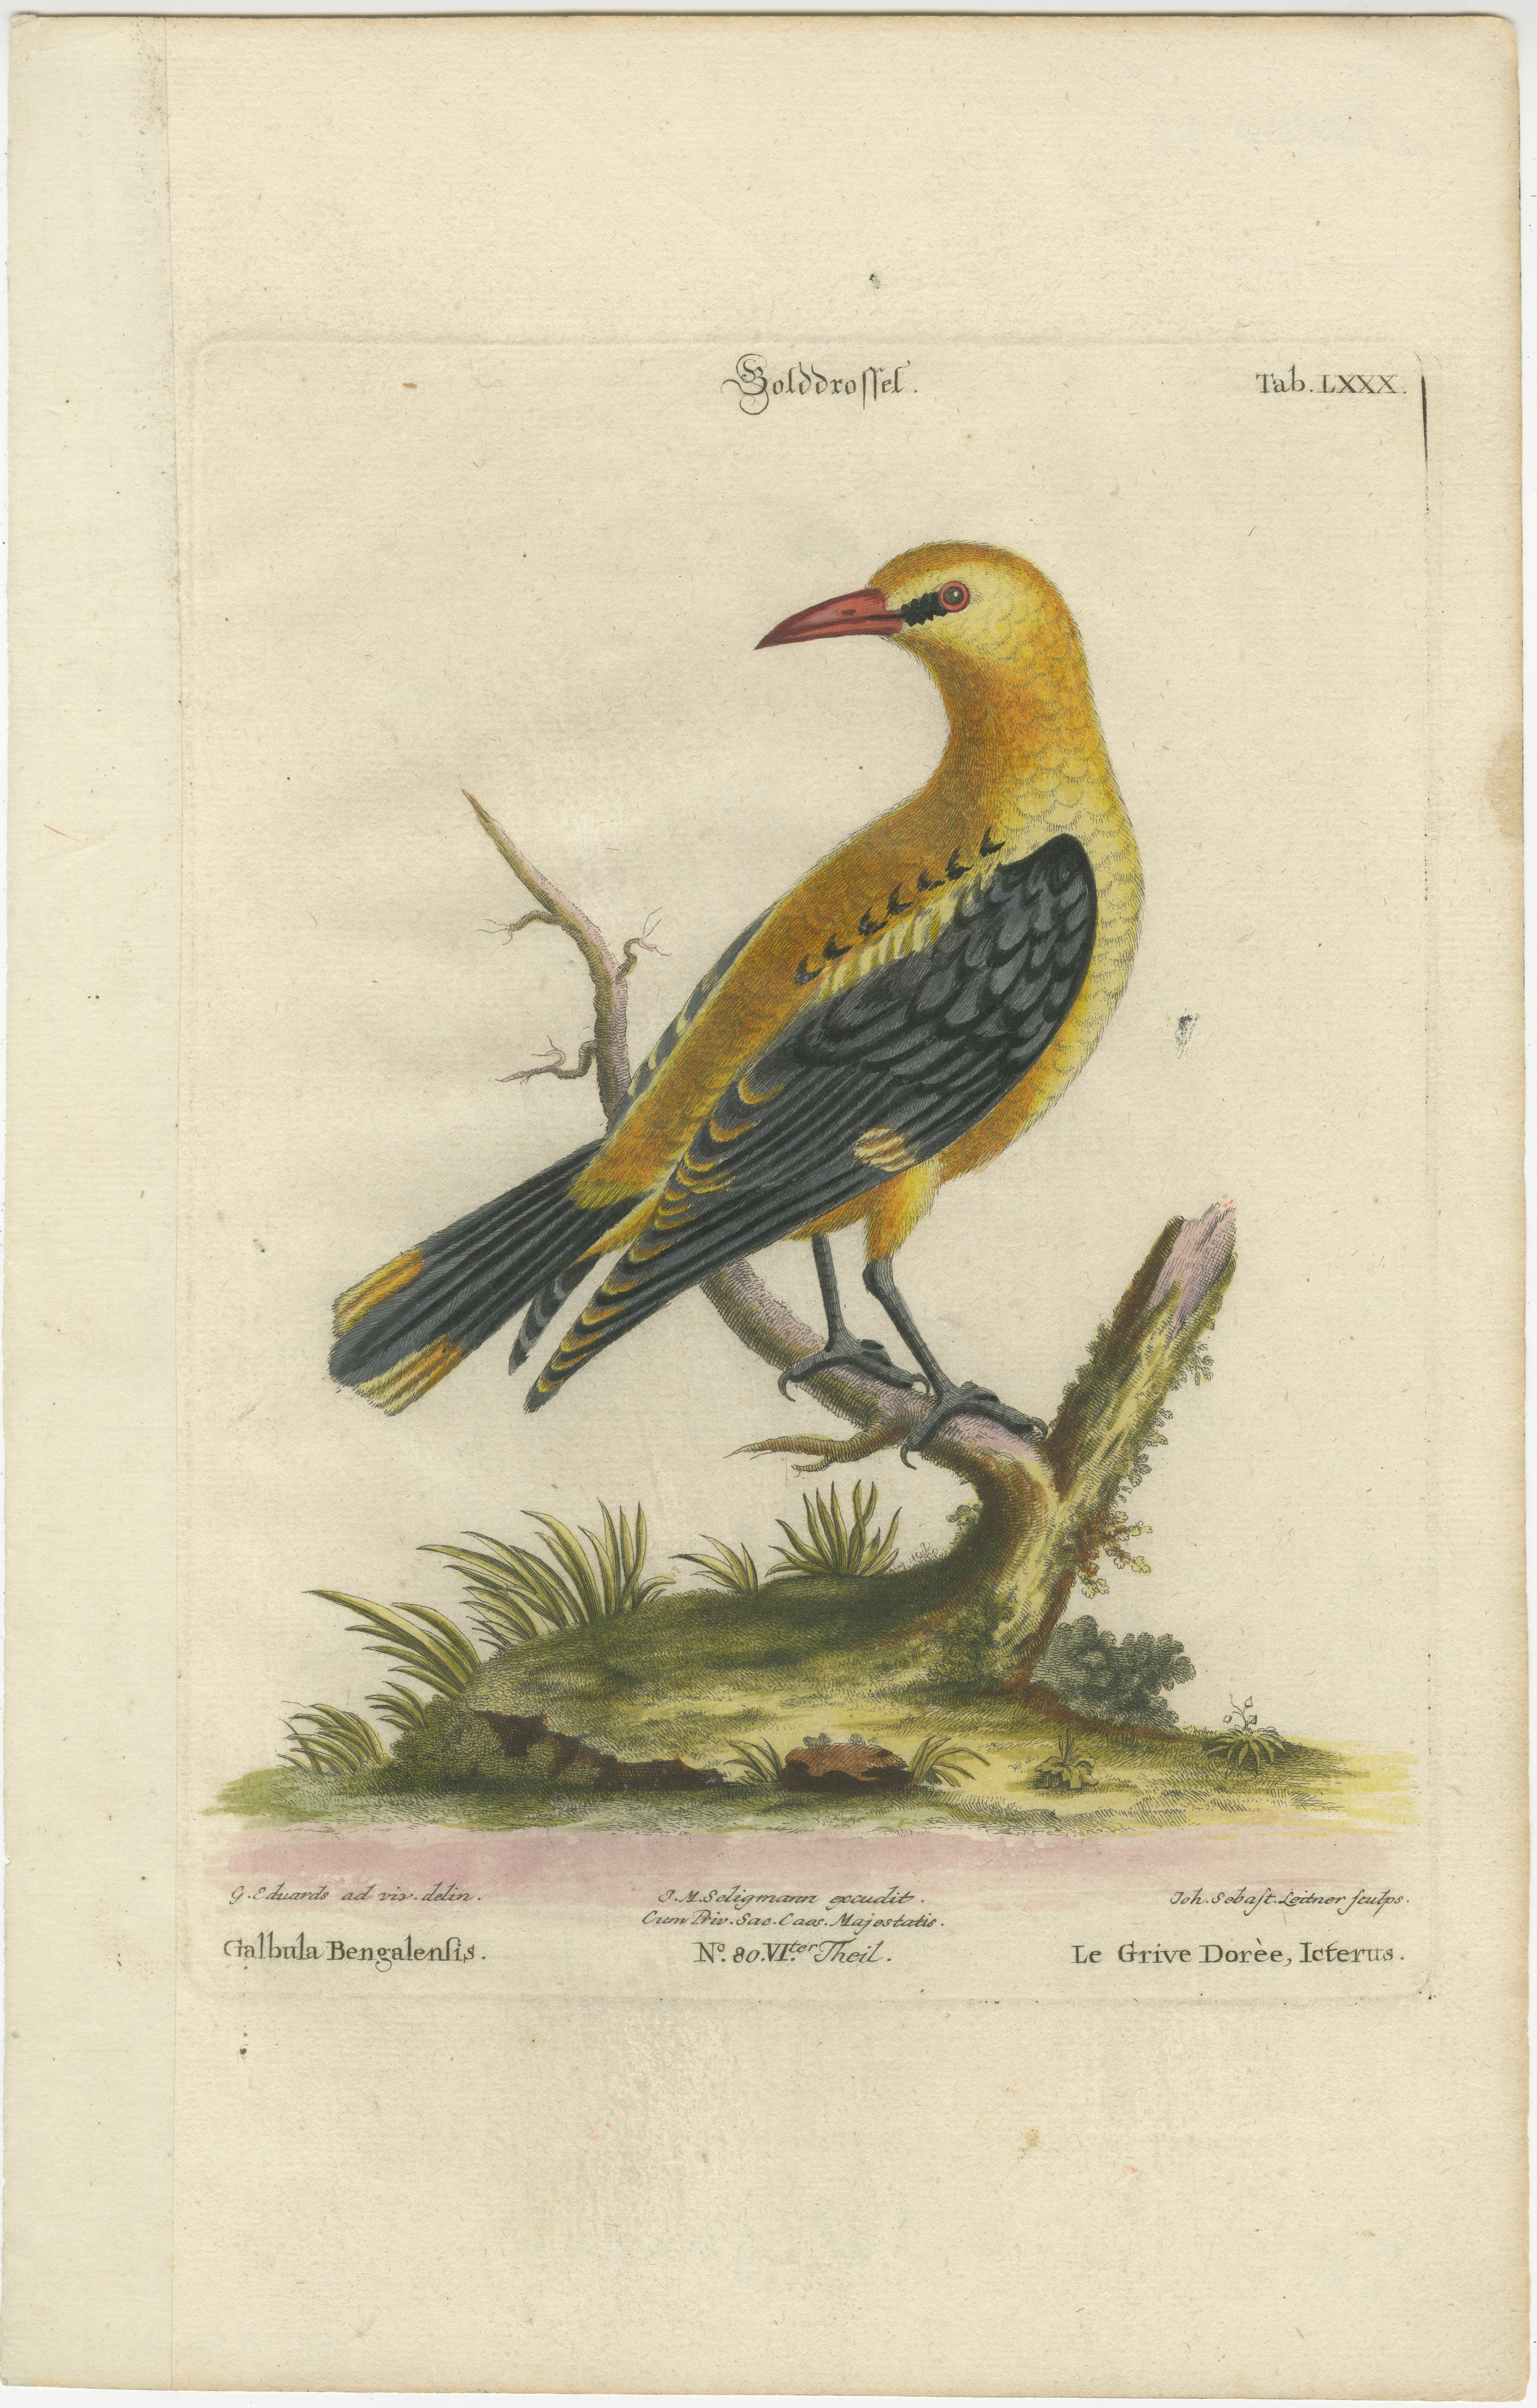 This original antique hand-colored engraving by Johann Michael Seligmann is a representation of the Golden Thrush, derived from George Edwards' 